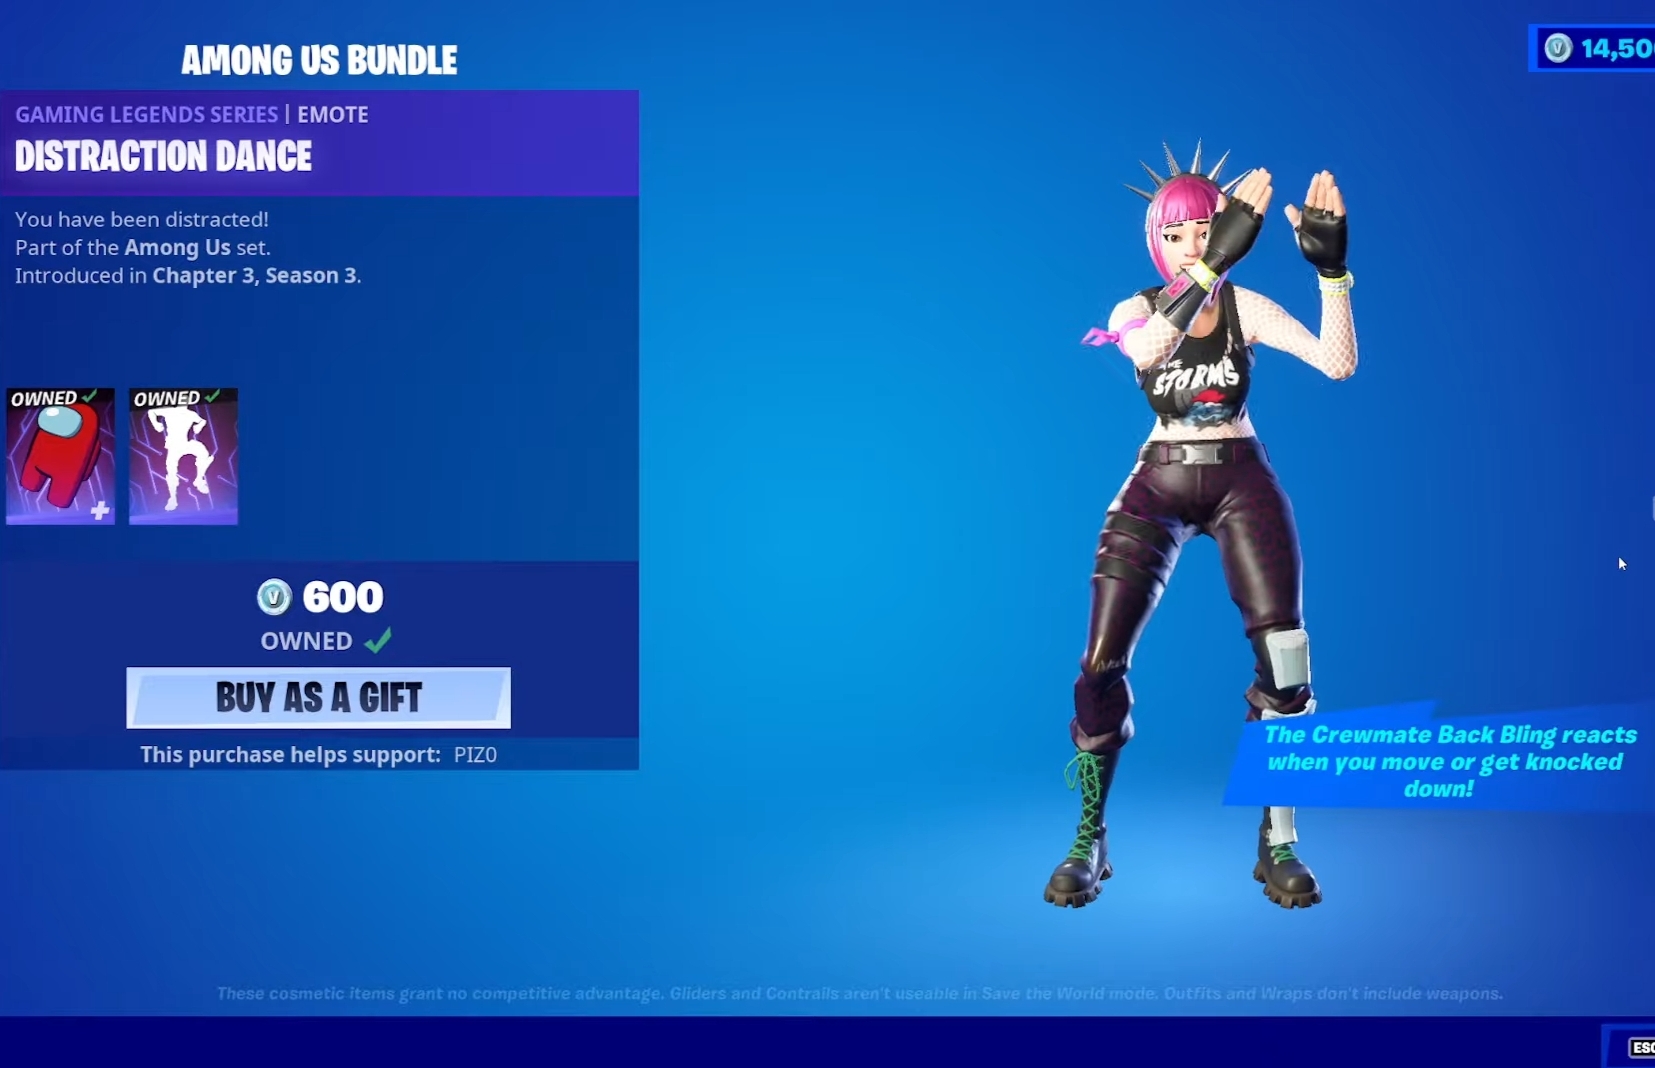 Fortnite x Among Us: New Among Us Bundle is now out in the Item Shop